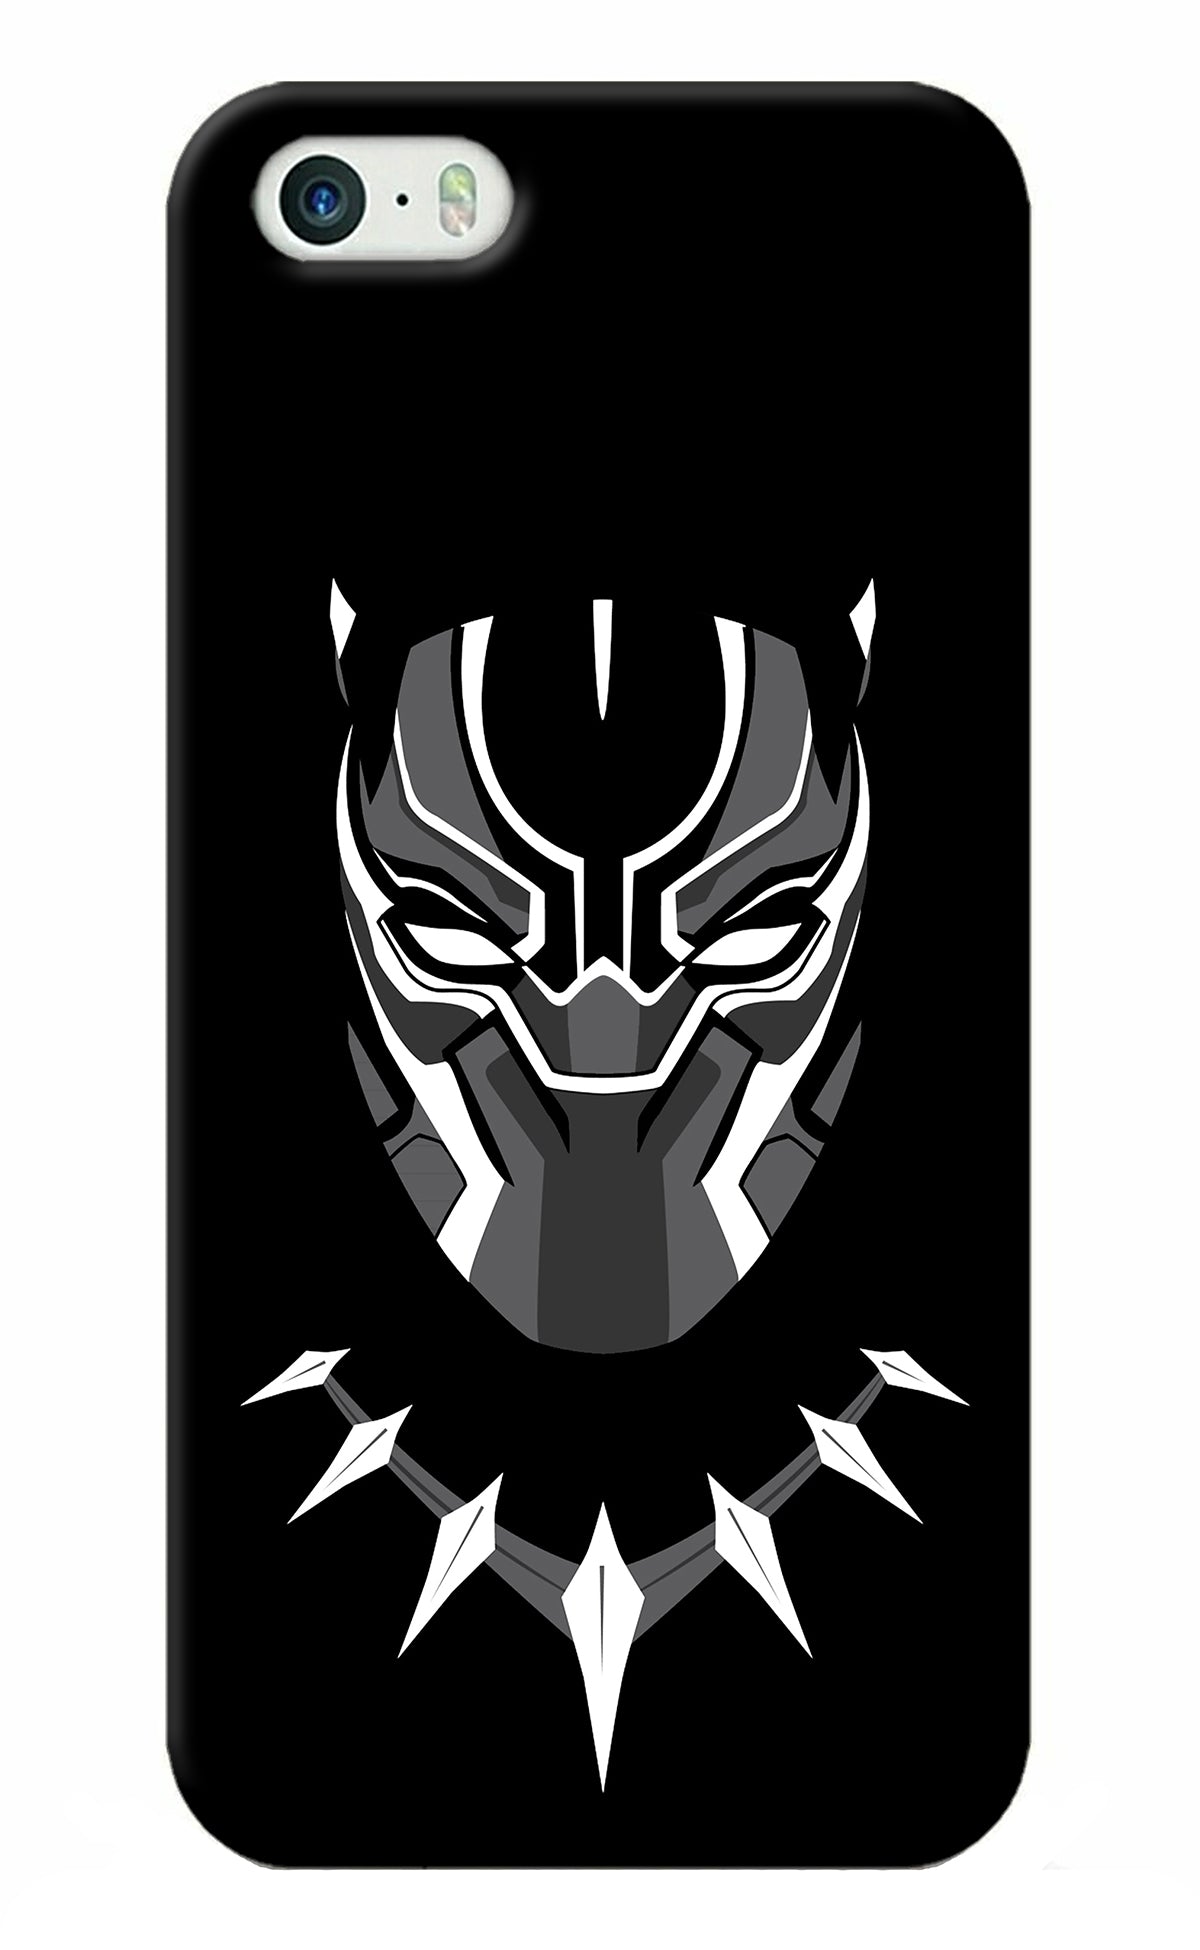 Black Panther iPhone 5/5s Back Cover